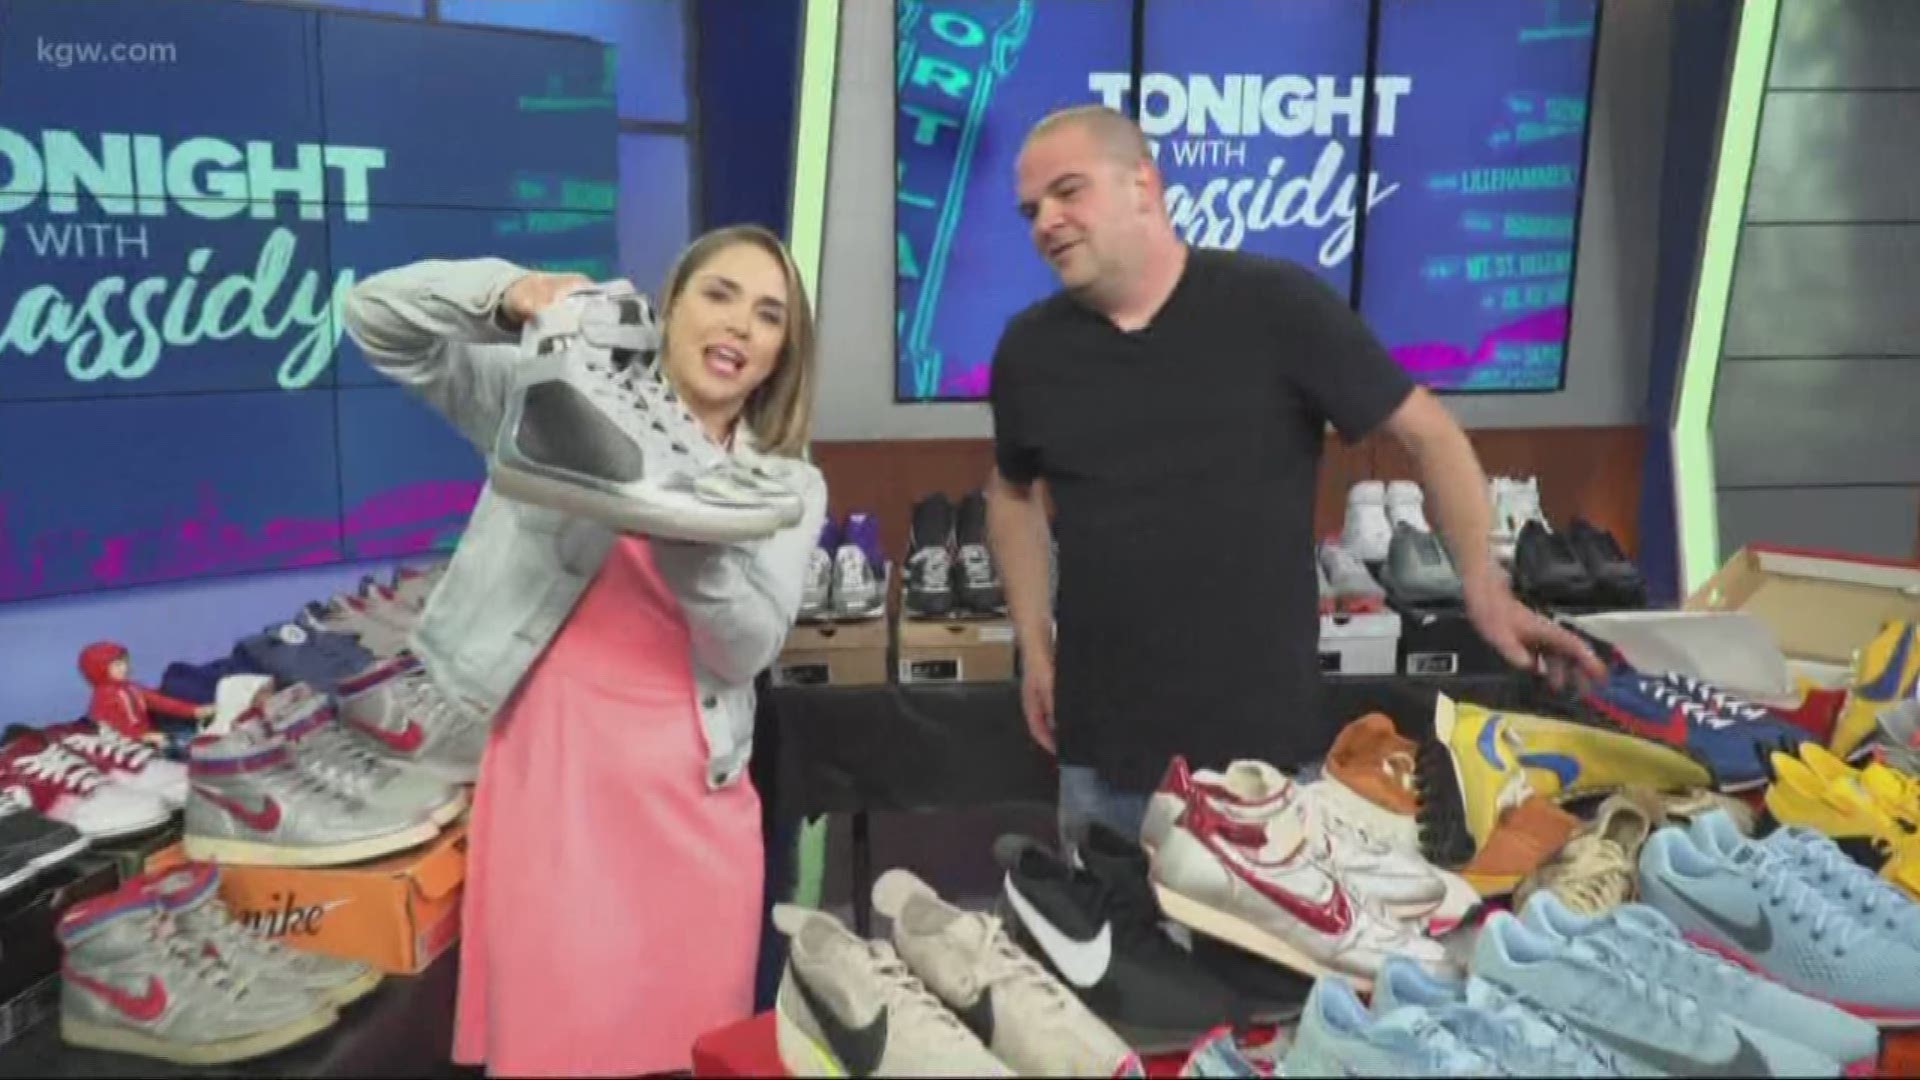 We highlight a huge Nike shoe collection. There were so many, we couldn't possibly chat about all of them on live tv. So here's what happened after the show.
#TonightwithCassidy